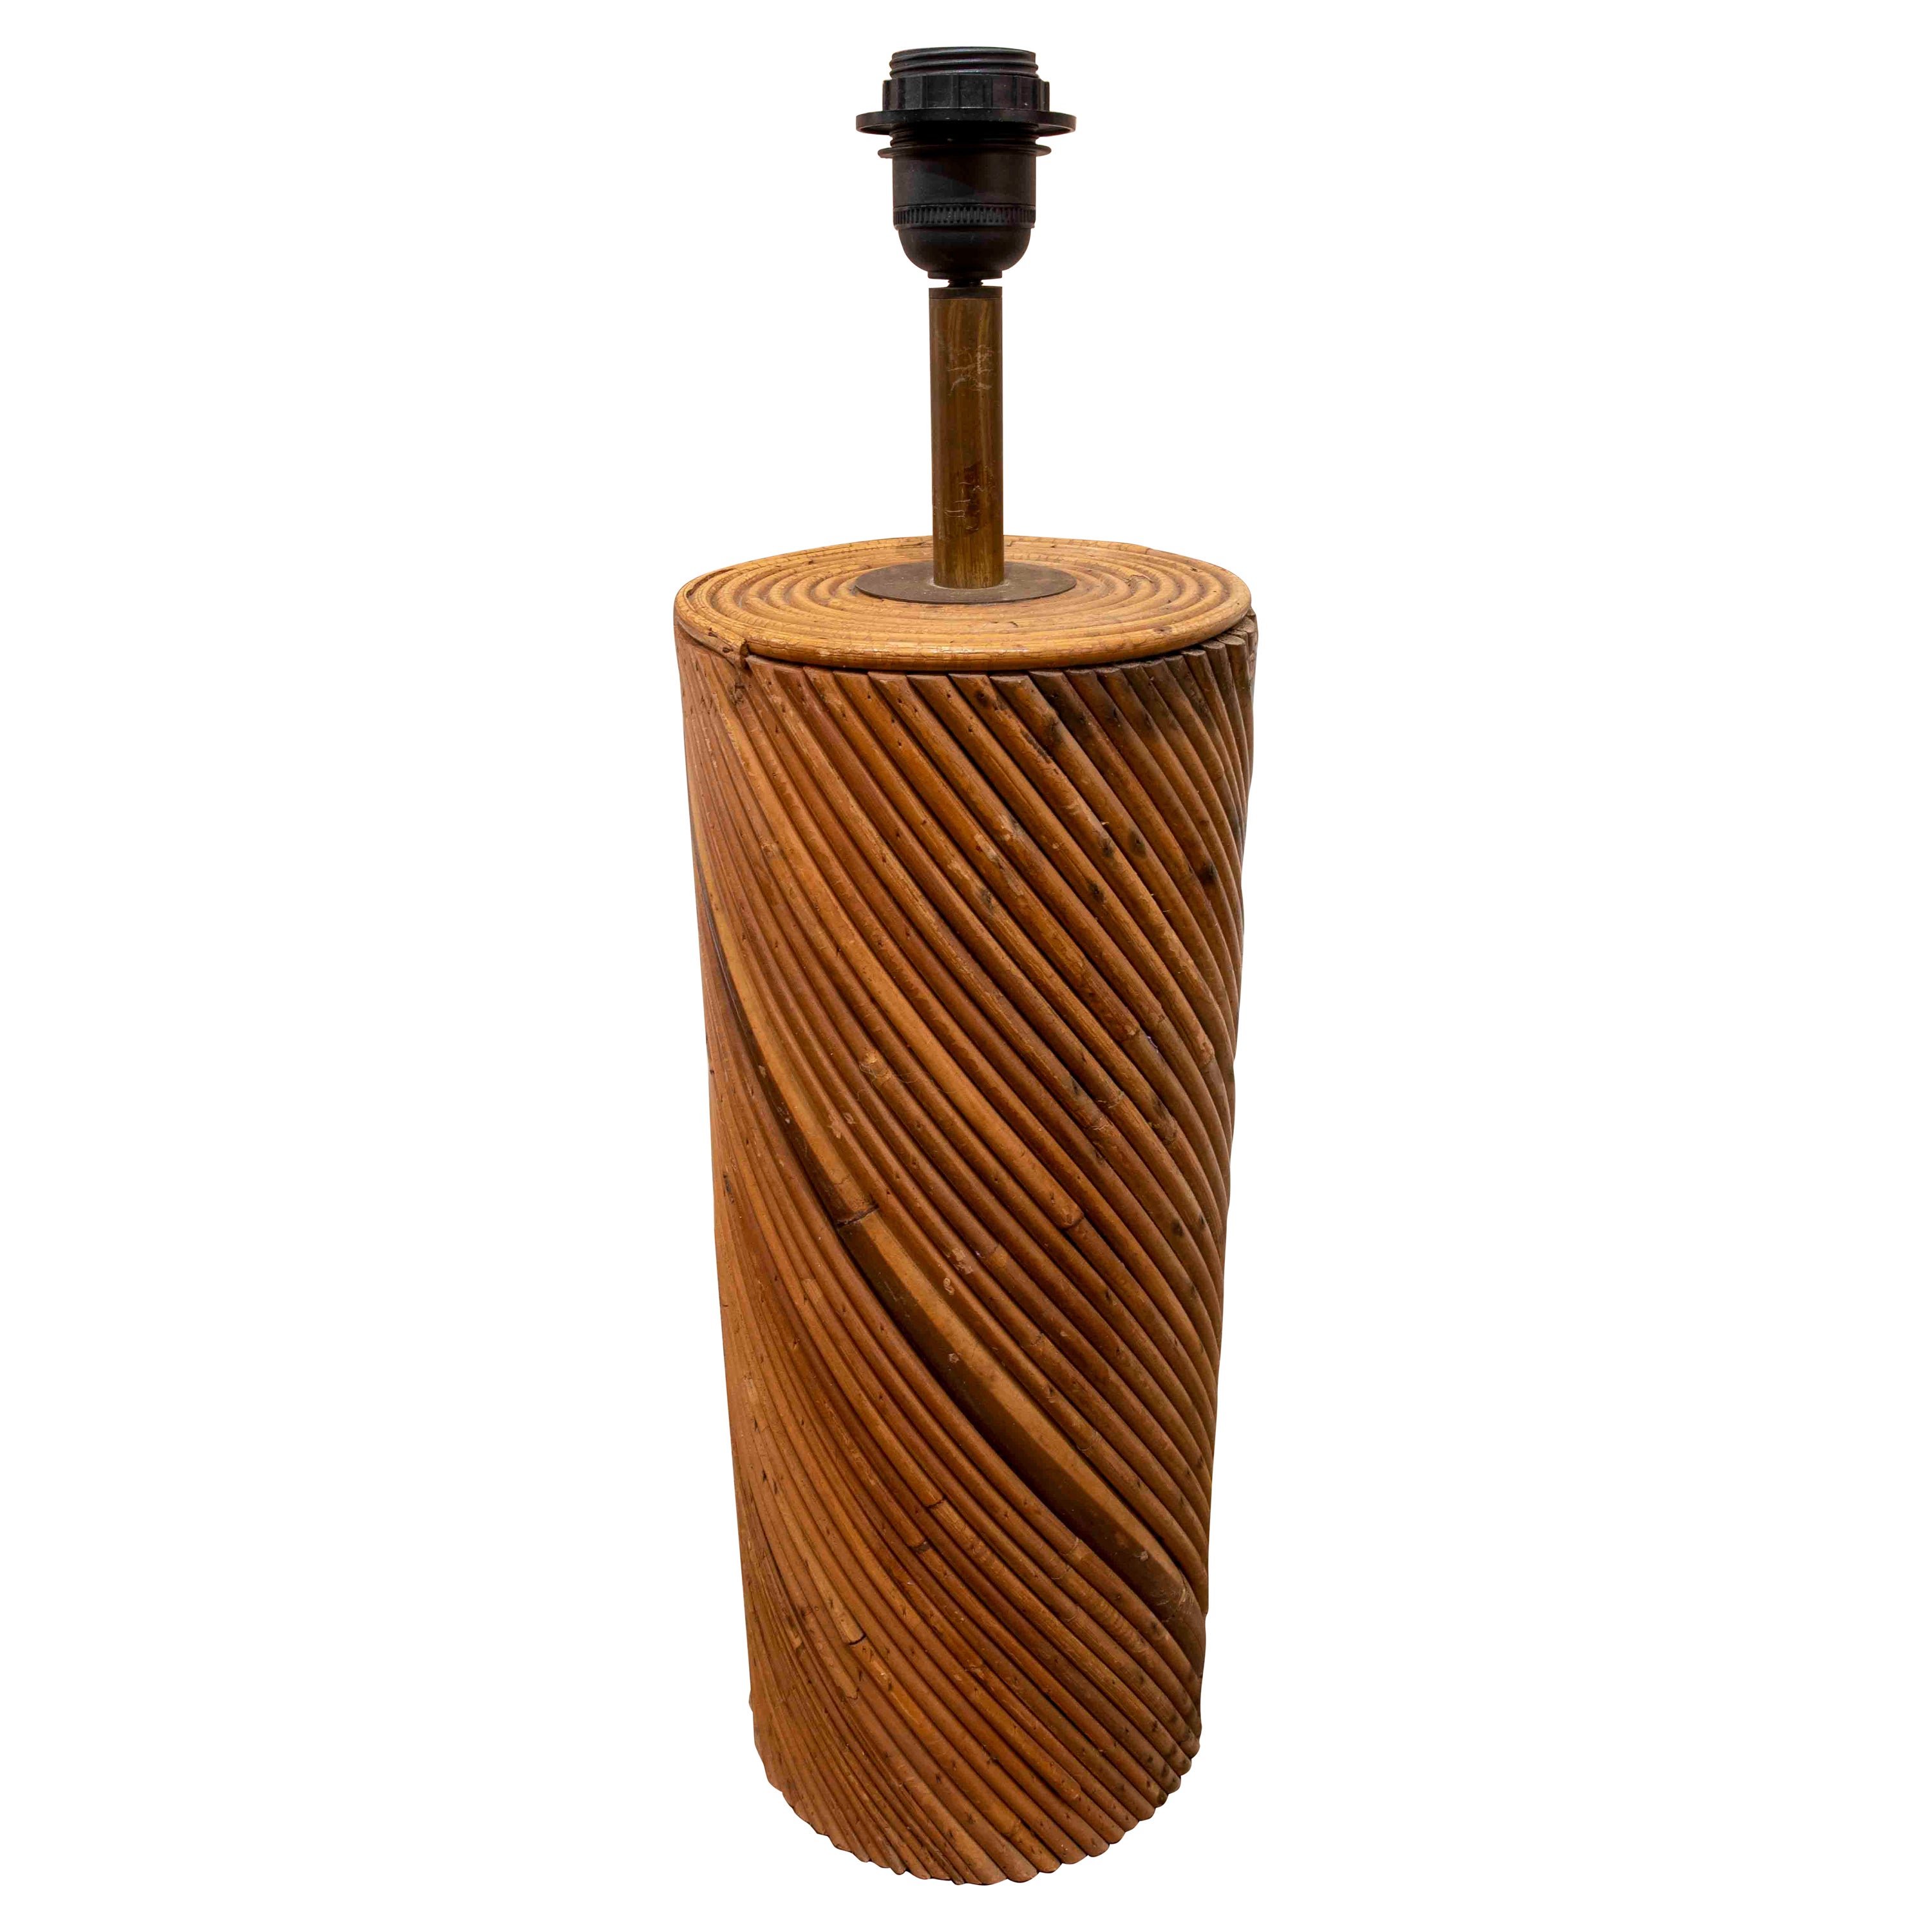 Bamboo and Brass Table Lamp with Round Shape